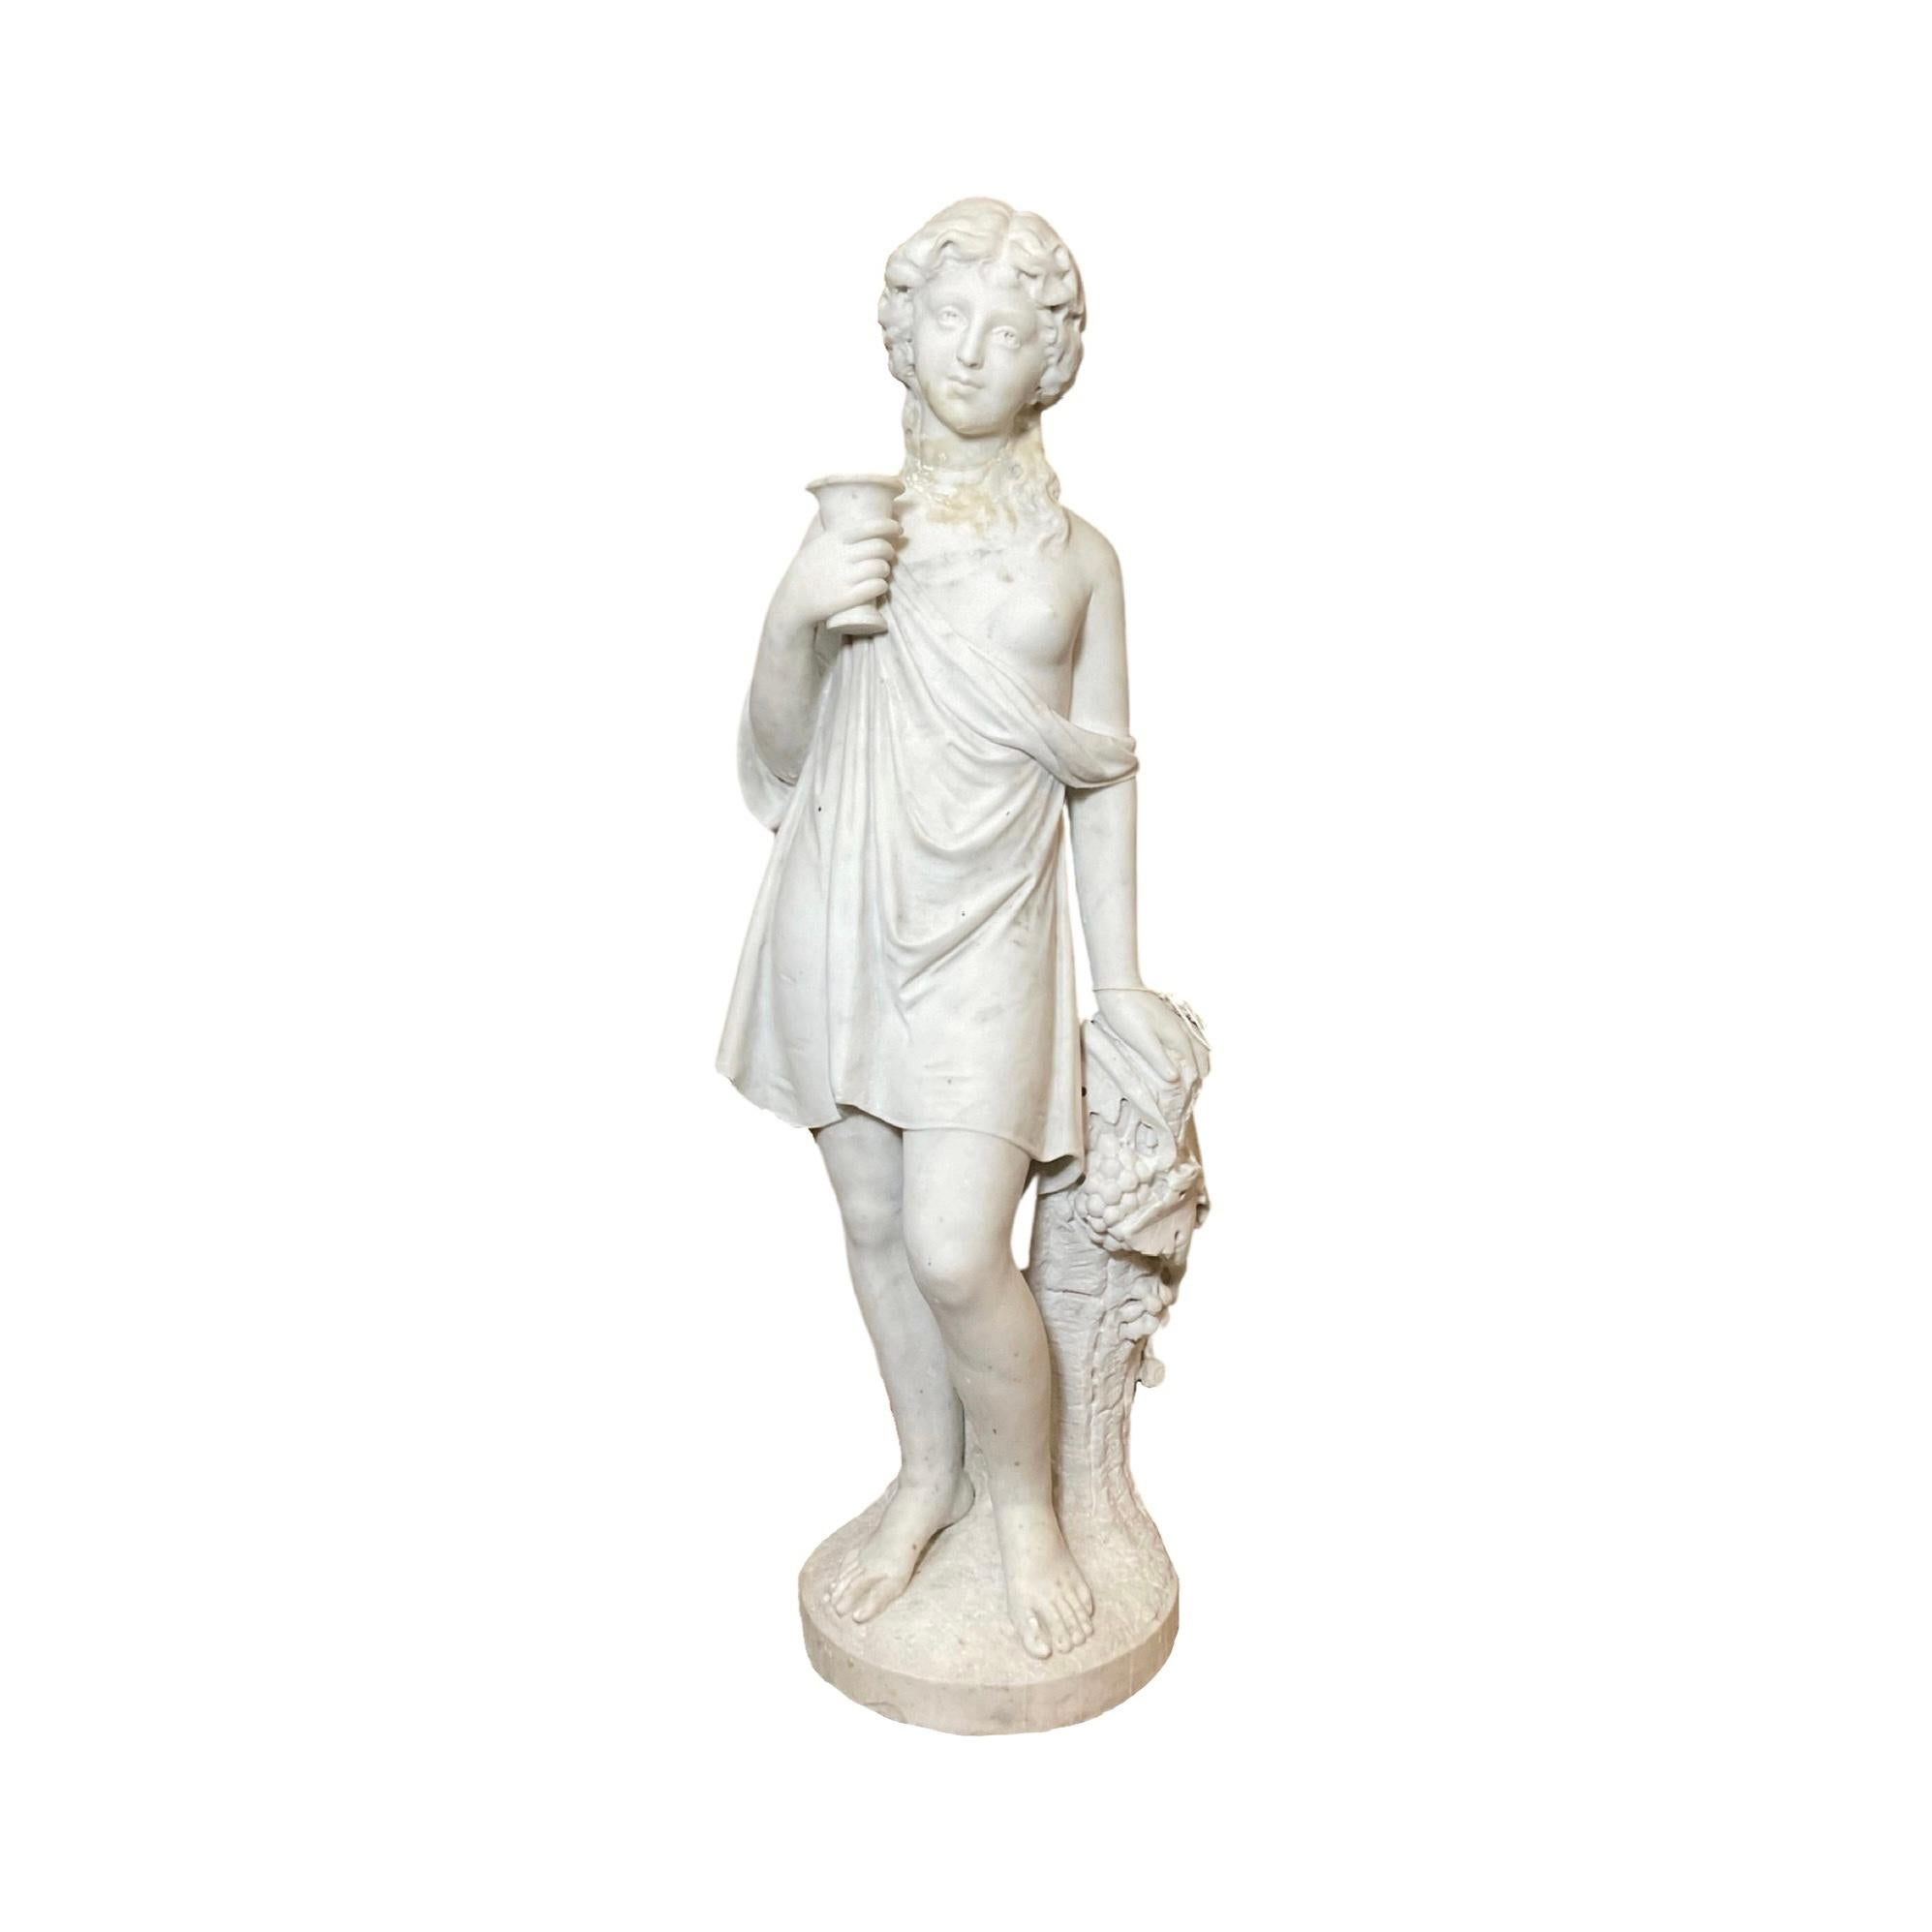 This 1890s French White Carrara Marble Sculpture is a timeless and elegant masterpiece, hand-crafted from the finest marble in France. Its classic design and high-quality material make it a valuable addition to any art collection. Choose to display